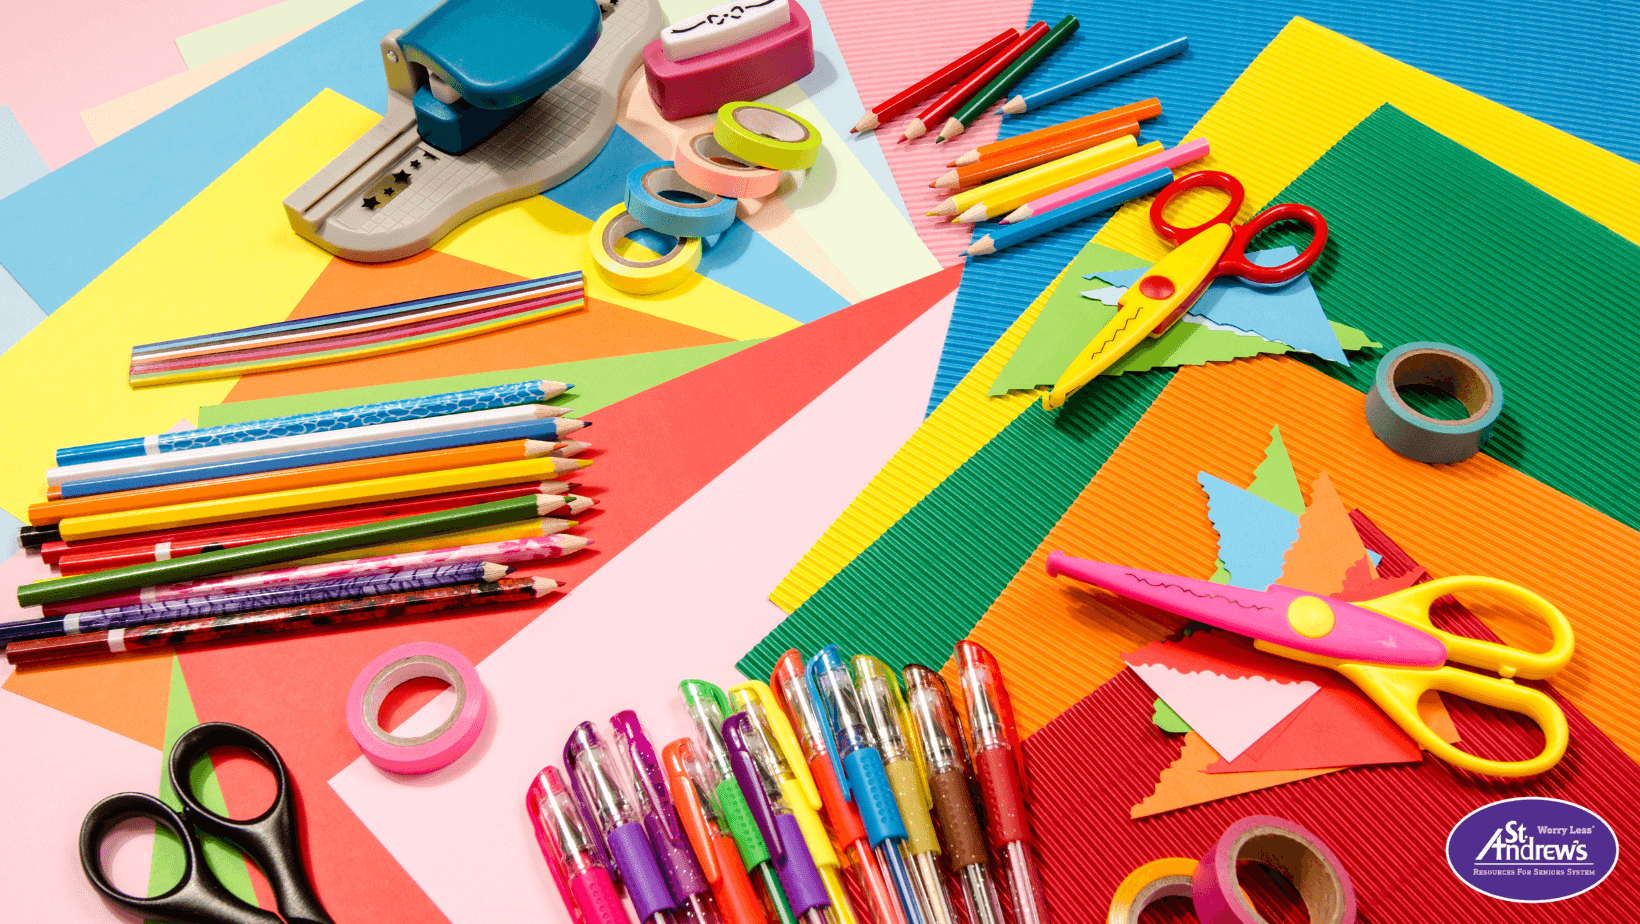 Arts and crafts, colorful paper and scissors with colored pencils